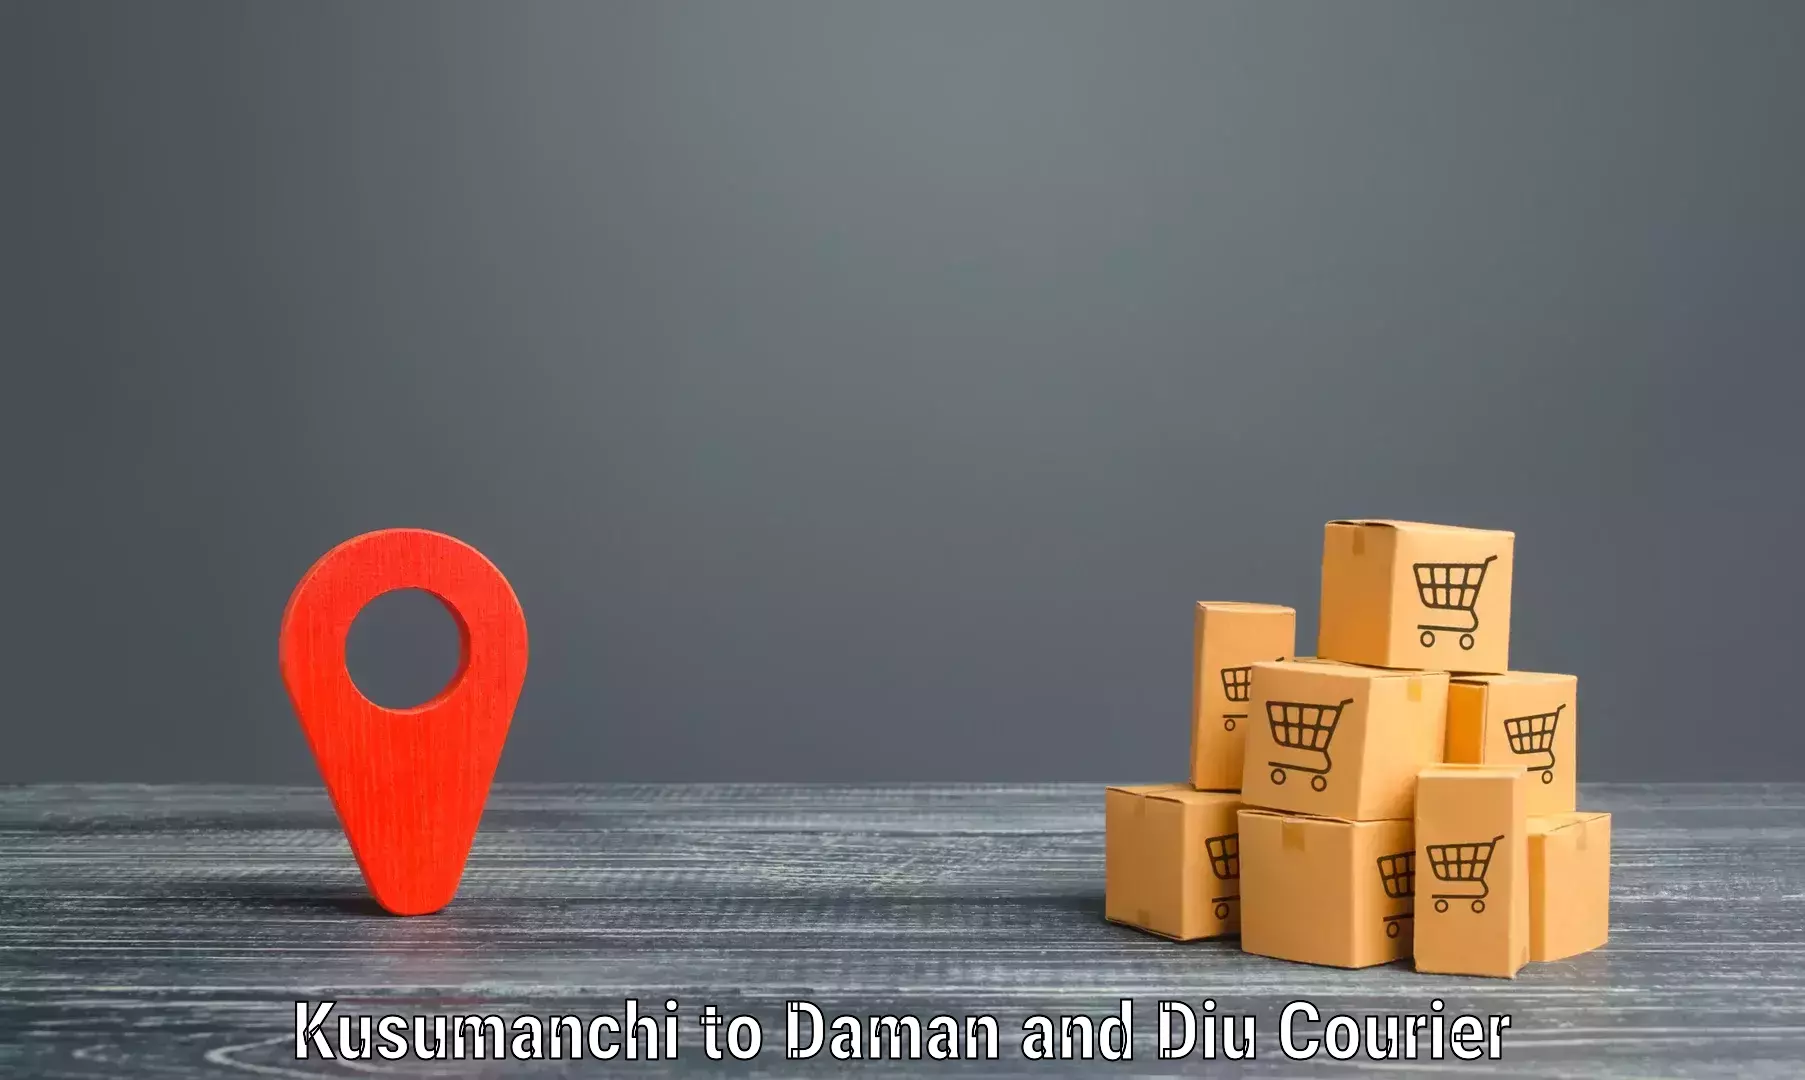 Nationwide delivery network in Kusumanchi to Diu